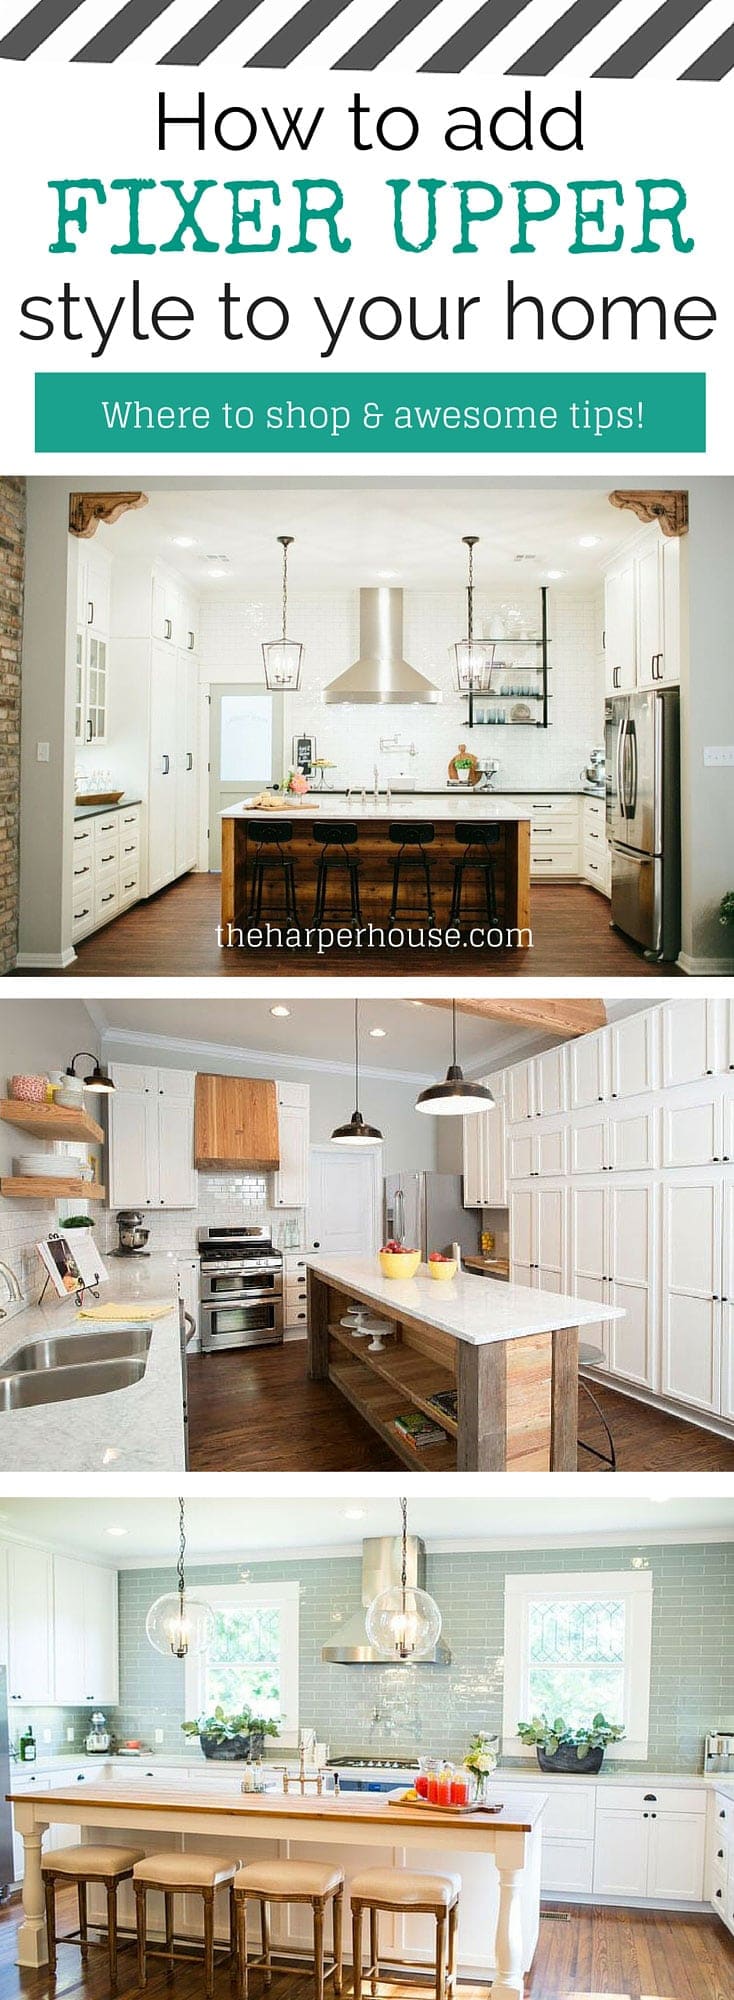 Do you want to add Fixer Upper style to your home but aren't sure where to start? I'll show you exactly what to do, starting with the kitchen!